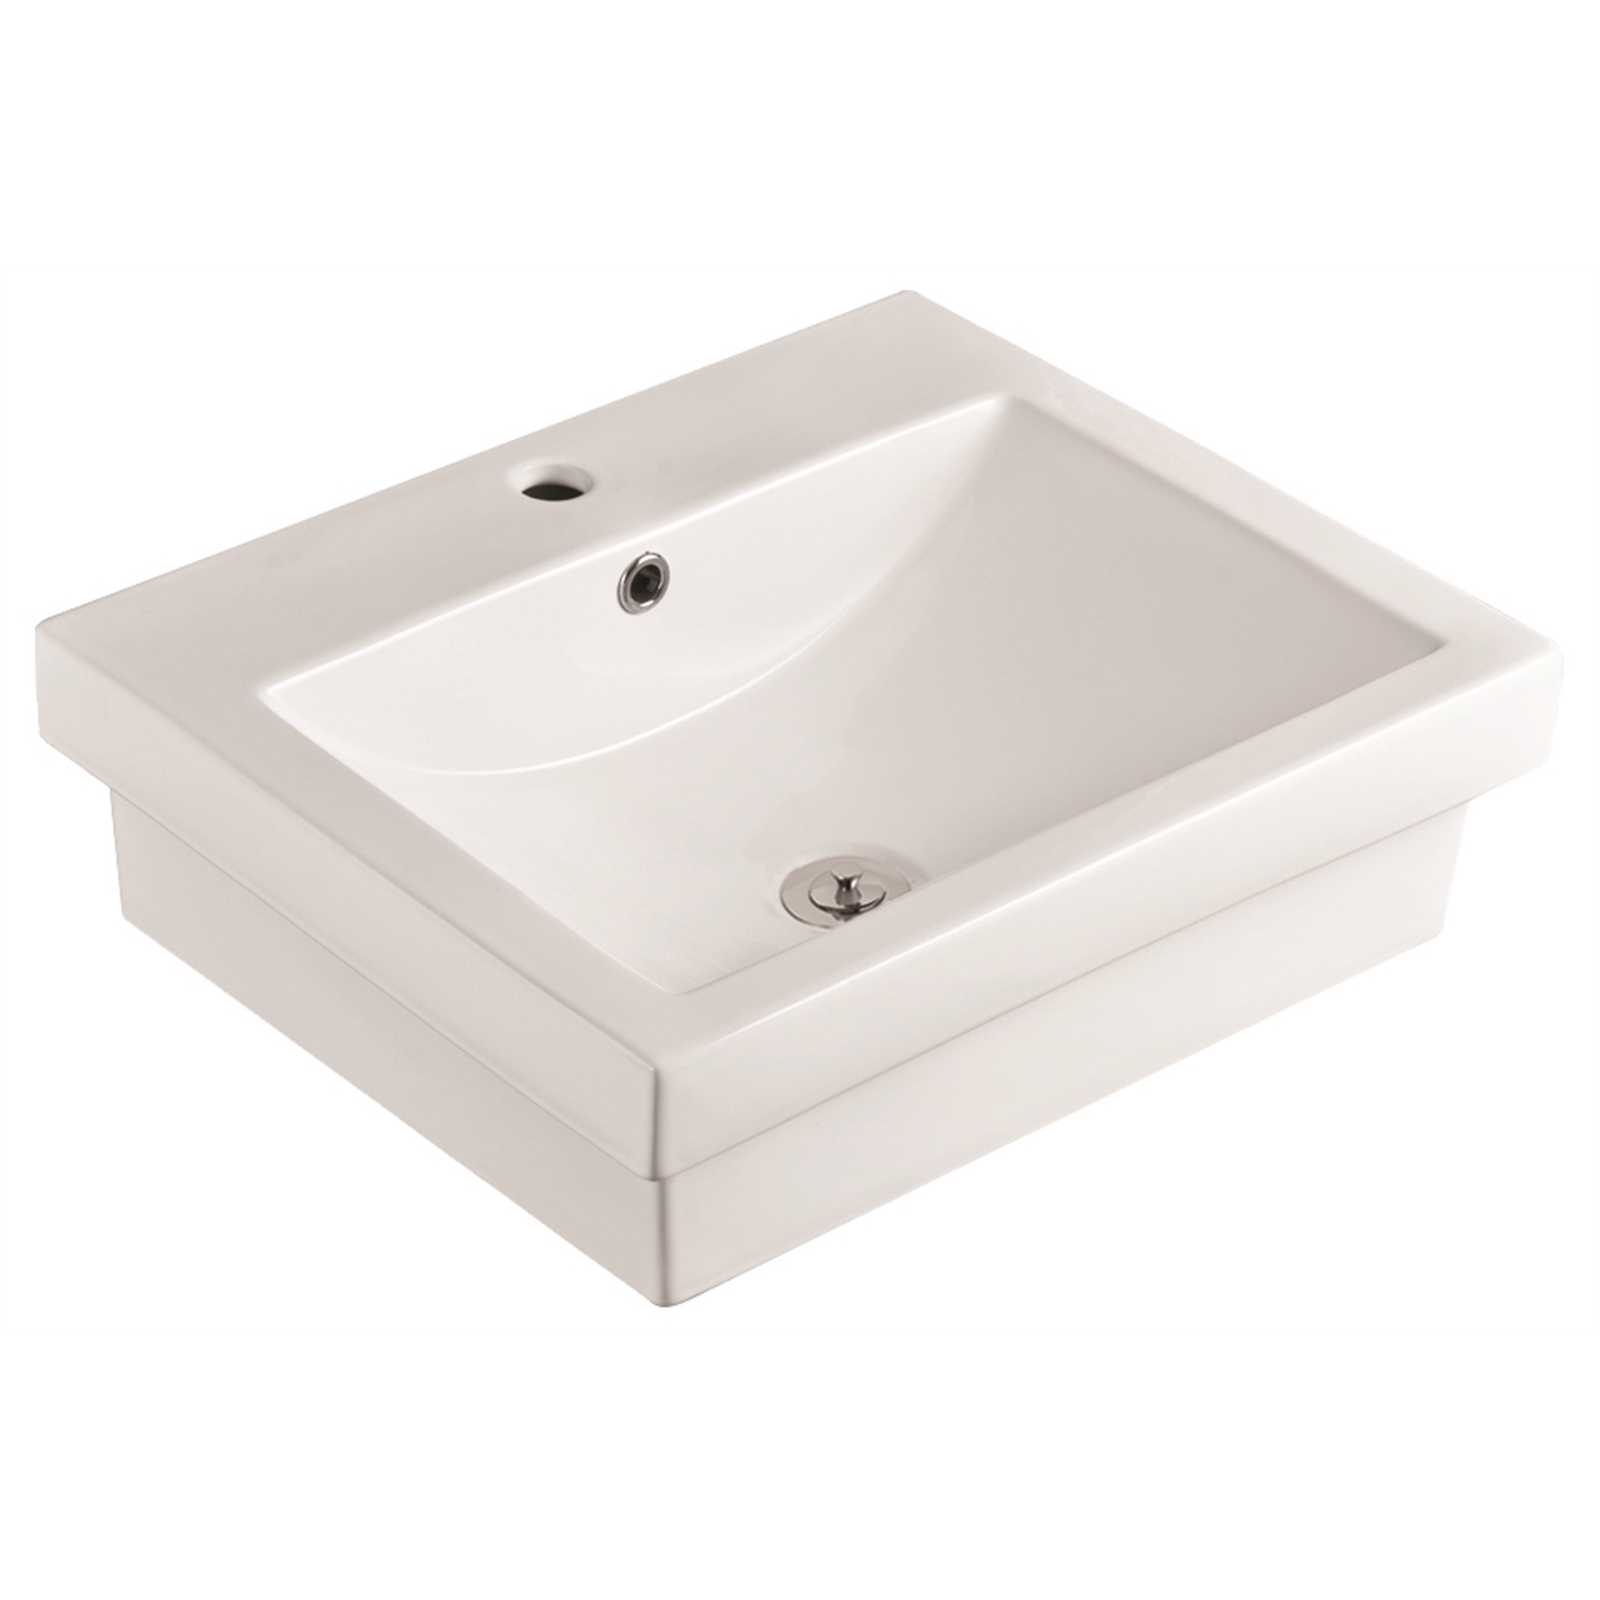 Everhard 1TH Virtue Square Insert Basin with Chrome Plug and Waste